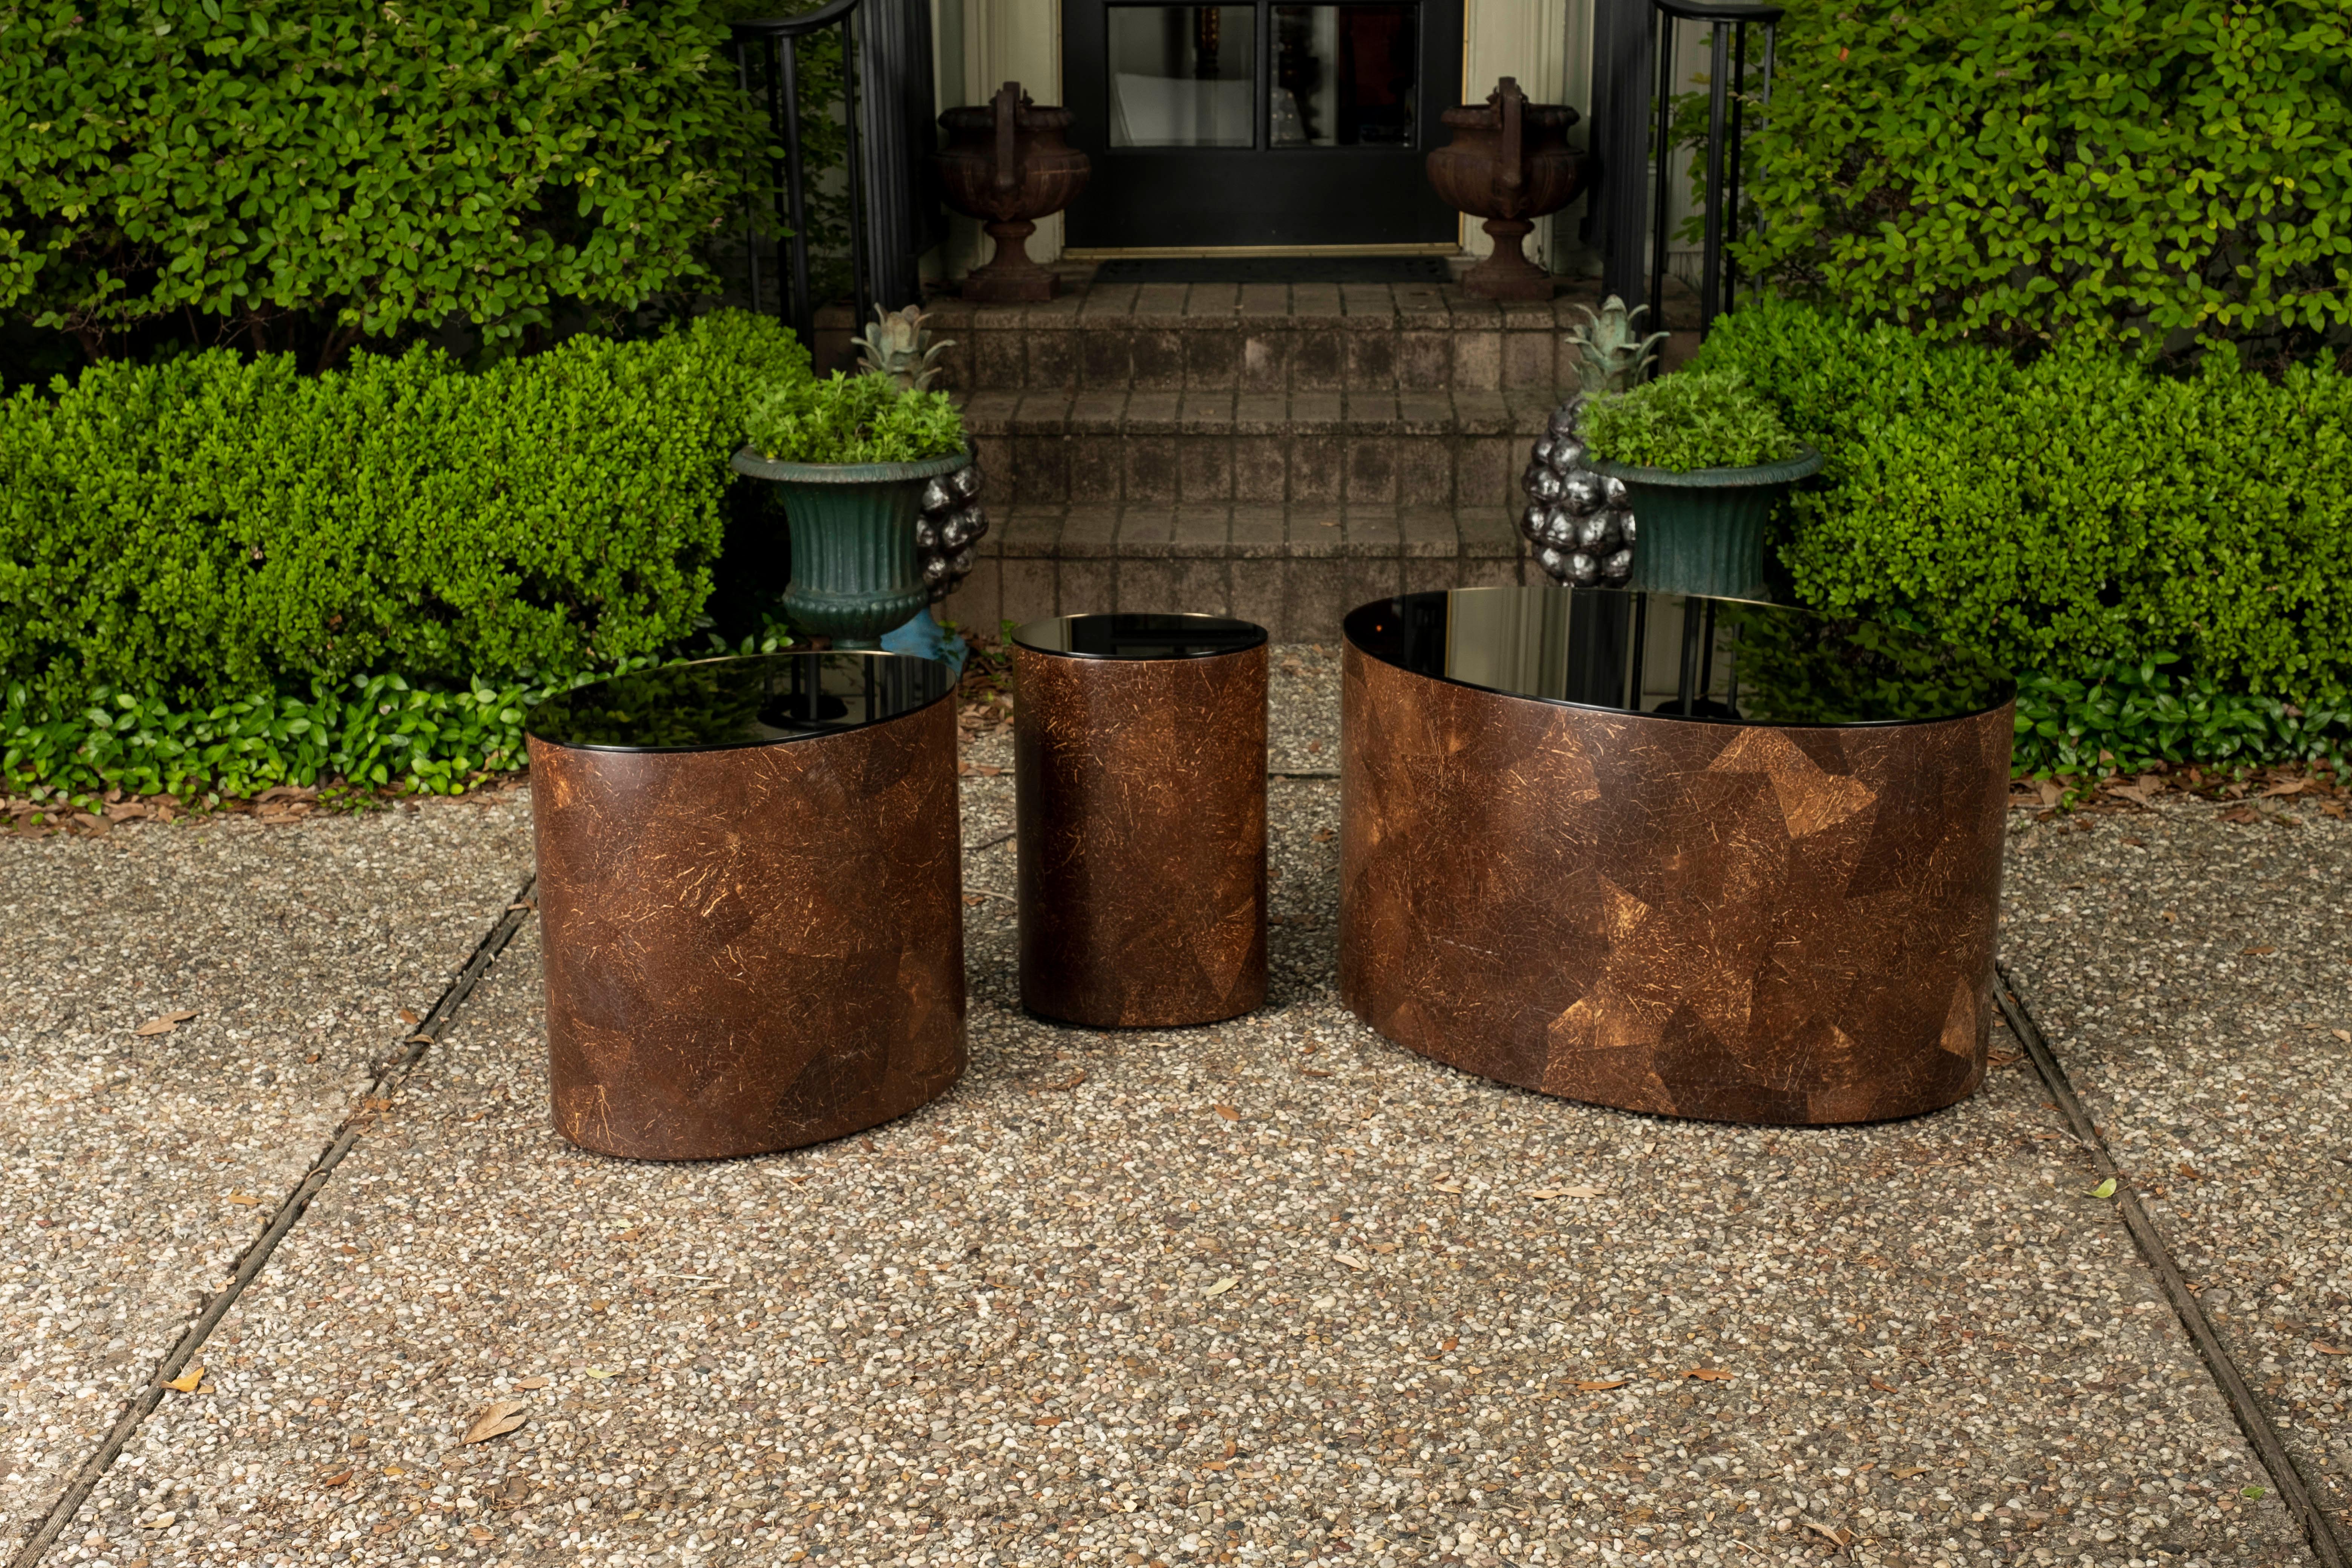 Set of post modern coconut shell tables. This handsome set consists of 3 mid-century oval coconut shell tables with bronze mirrored tops. This rare versatile set of vintage coconut shell tables could be used together to create an interesting